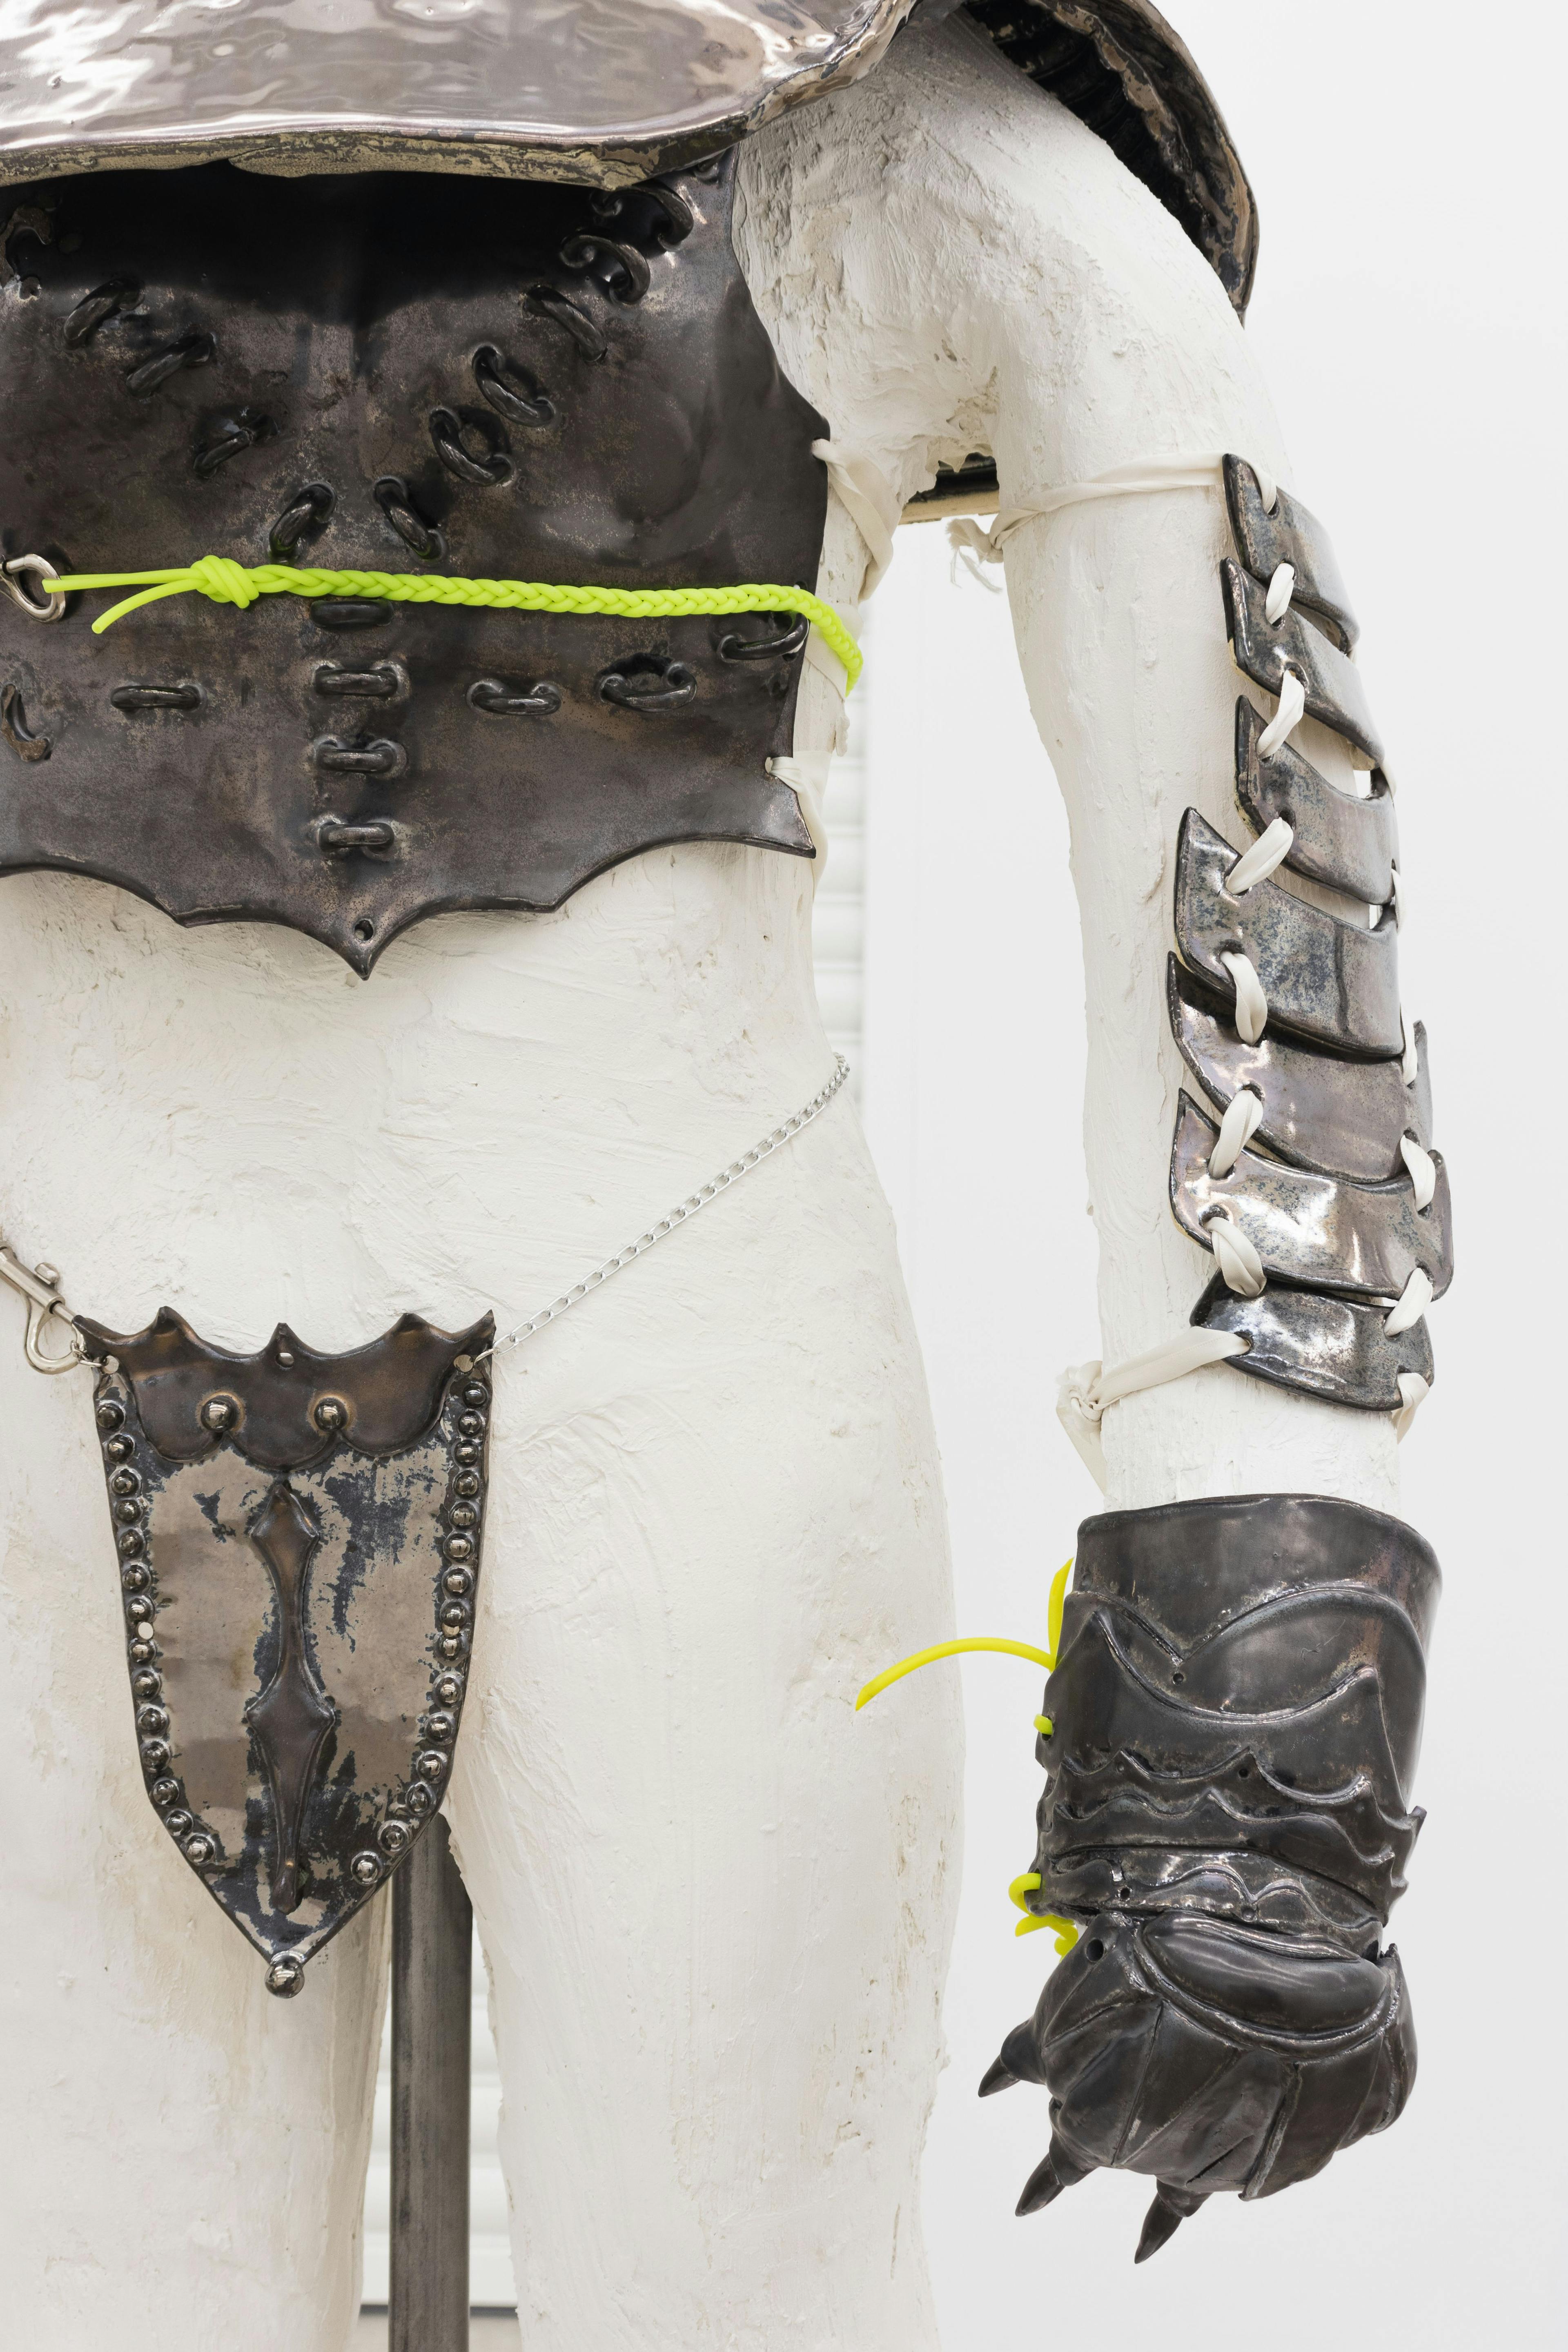 Catsuit 1, 2023

glazed stoneware, plaster, wire, satin ribbon, rubber cord, sterling and stainless steel jewelry

46h x 29w x 17d in